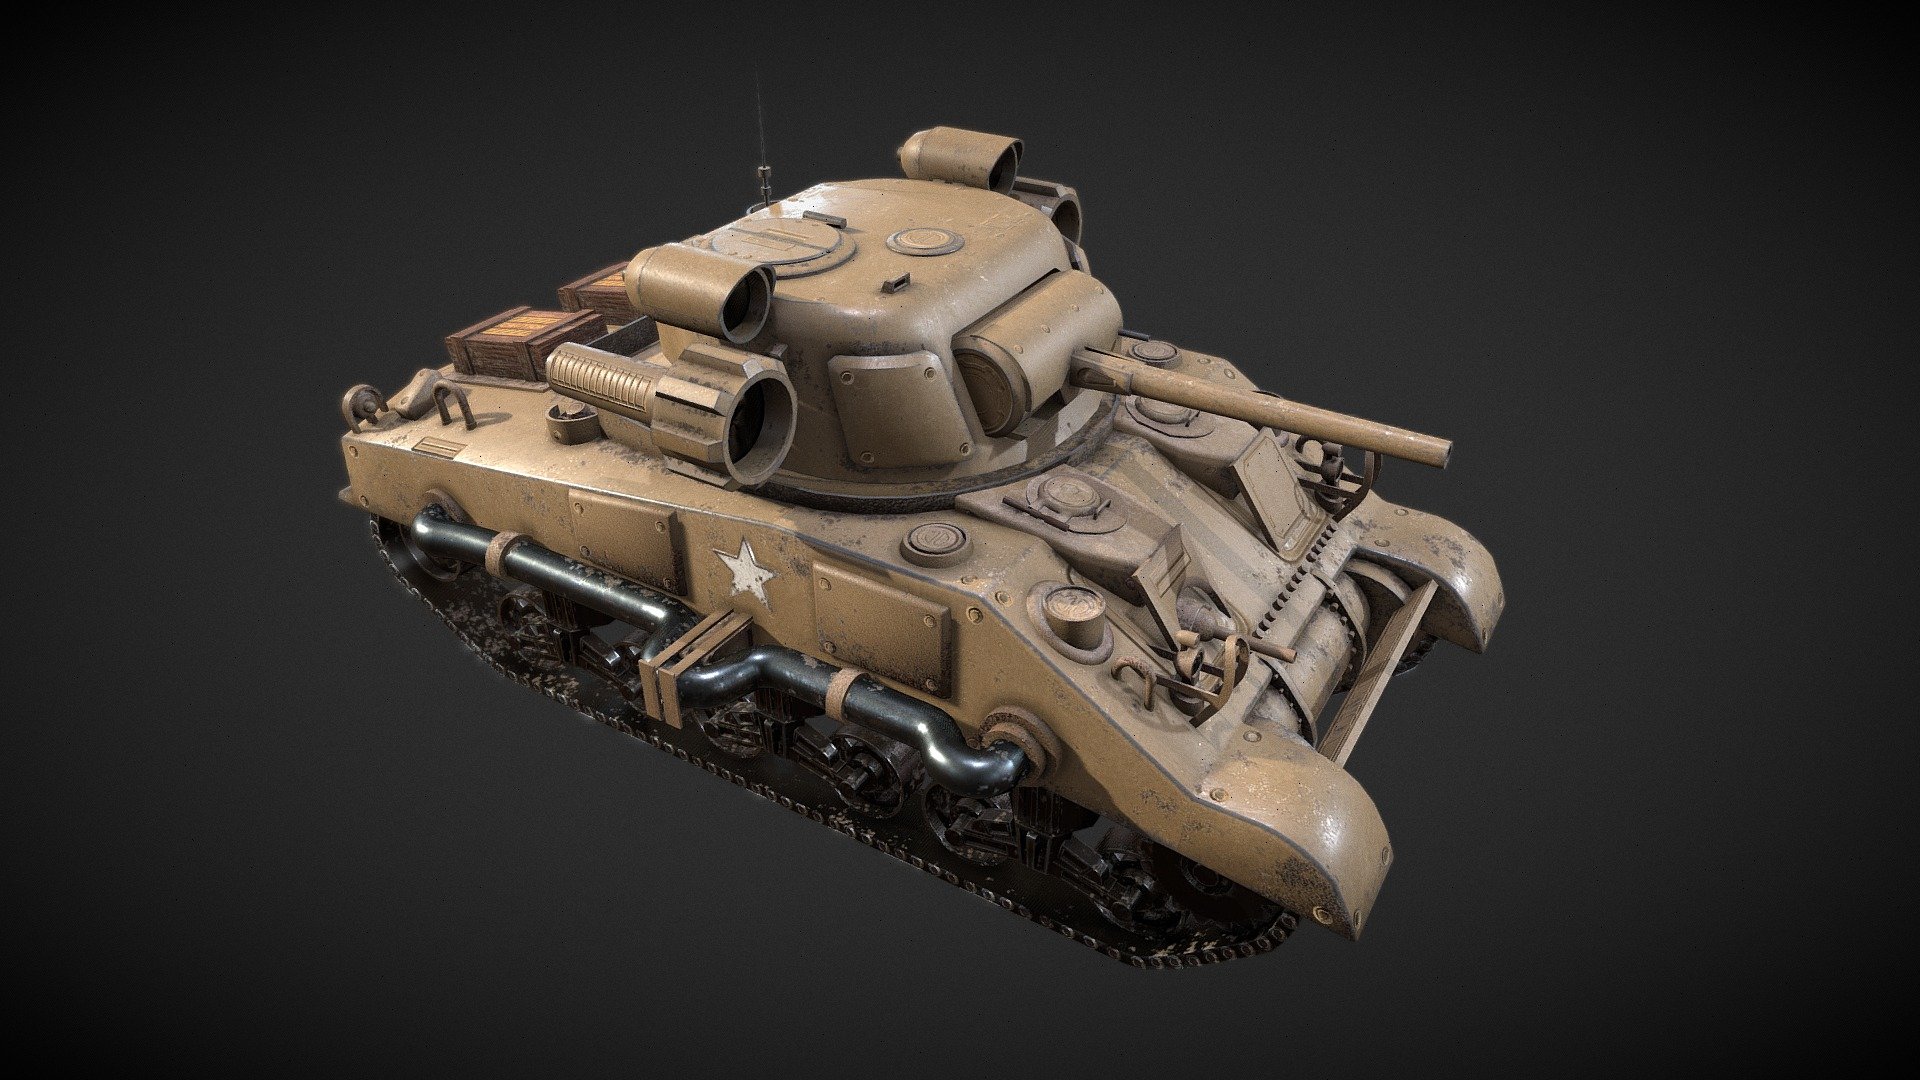 M4 Sherman Tank 75mm inspired from the Sherman Tank in the Fallout series - Model/Art by Outworld Studios

Must give credit to Outworld Studios if using this asset.

Show support by joining my discord: https://discord.gg/EgWSkp8Cxn - M4 Sherman Tank 75mm - Buy Royalty Free 3D model by Outworld Studios (@outworldstudios) 3d model